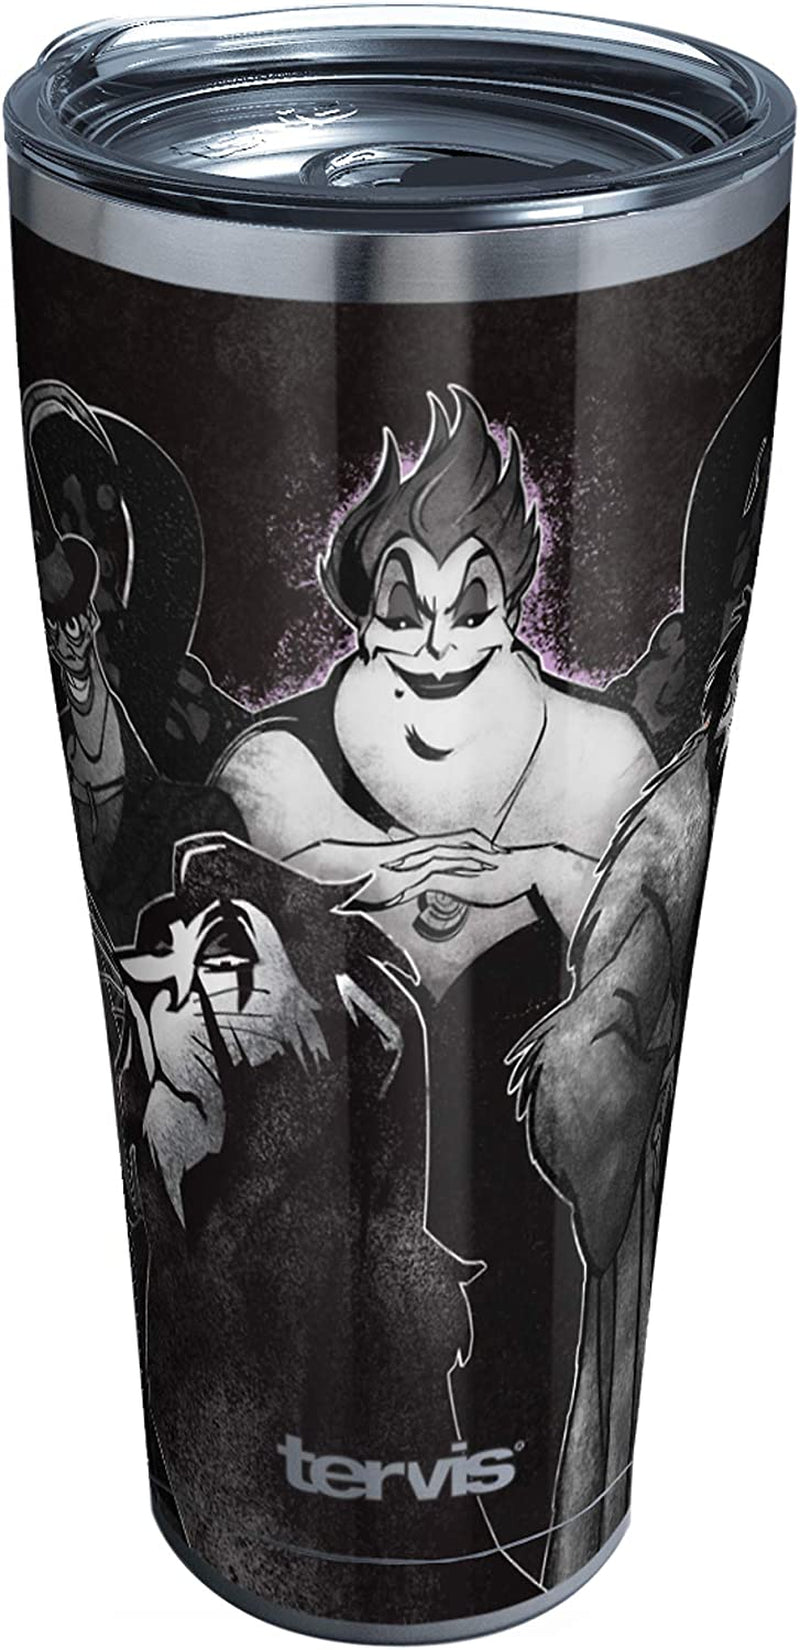 Tervis Triple Walled Disney Villains Insulated Tumbler Cup Keeps Drinks Cold & Hot, 20Oz, Maleficent Home & Garden > Kitchen & Dining > Tableware > Drinkware Tervis Group 30oz 